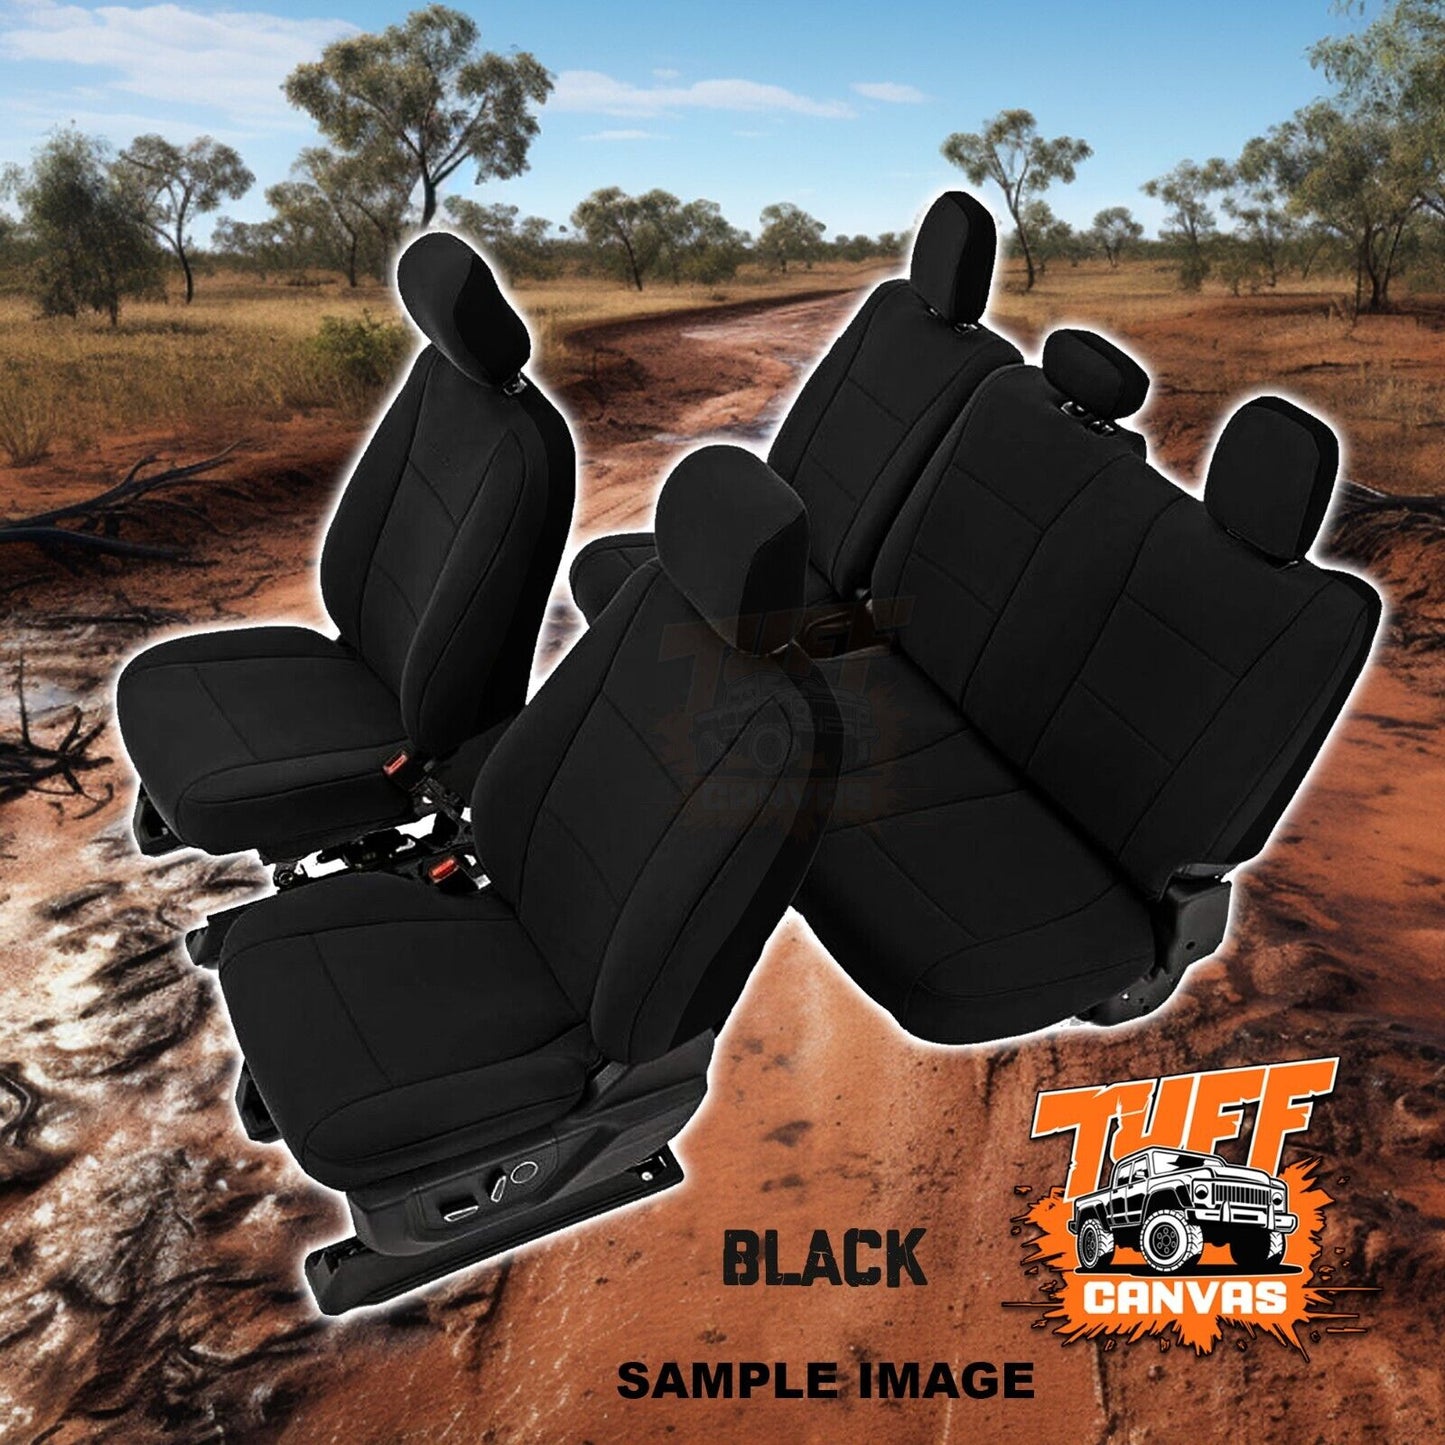 Black Tuff Canvas S2 Seat Covers 2 Rows For Toyota Hilux 150 KUN26R DC 4x4 5/2005-6/2015